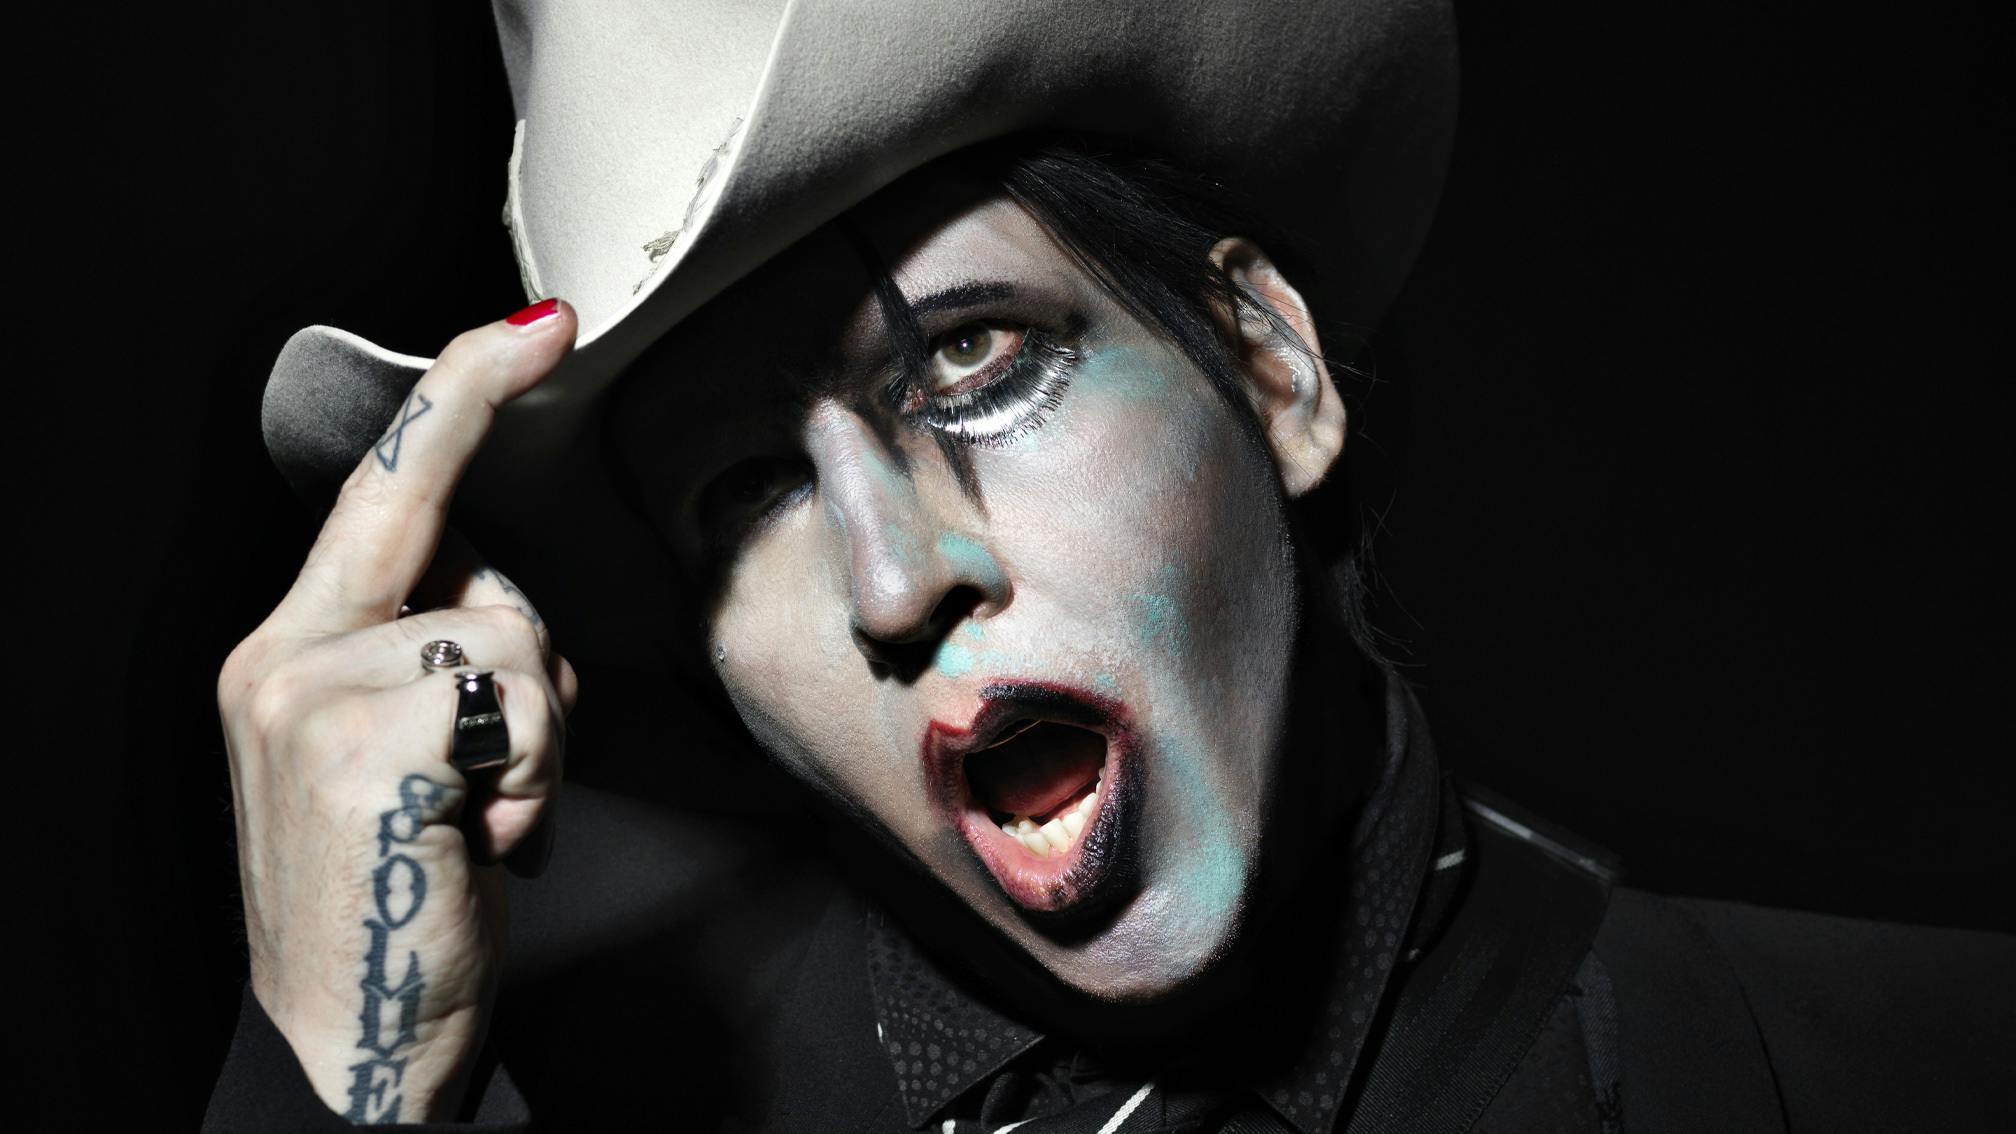 Listen To Marilyn Manson's New Single, Don't Chase The Dead